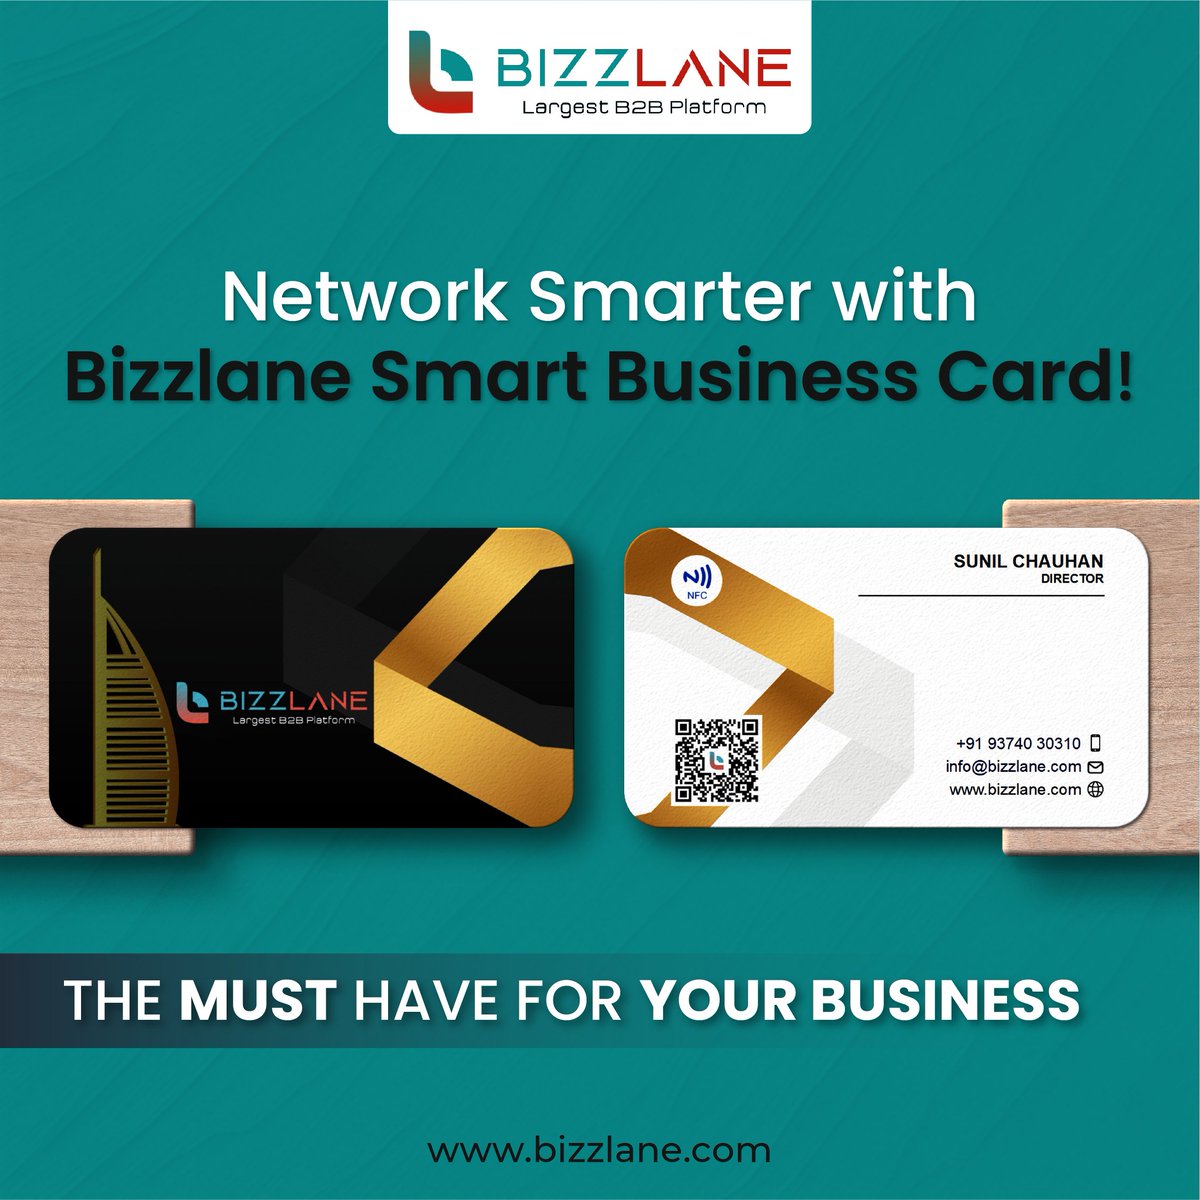 Network Smarter with Bizzlane Smart Business Card!
THE MUST HAVE FOR YOUR BUSINESS

#bizzlane #NFCcards #bizzlanecard #nfcbusinesscard #seamlessexperince #YourBusinessMatters #LevelUp2024 #communitybuild #foryourbusiness #smartbusinesscards #SmartNetwork #smartbusiness